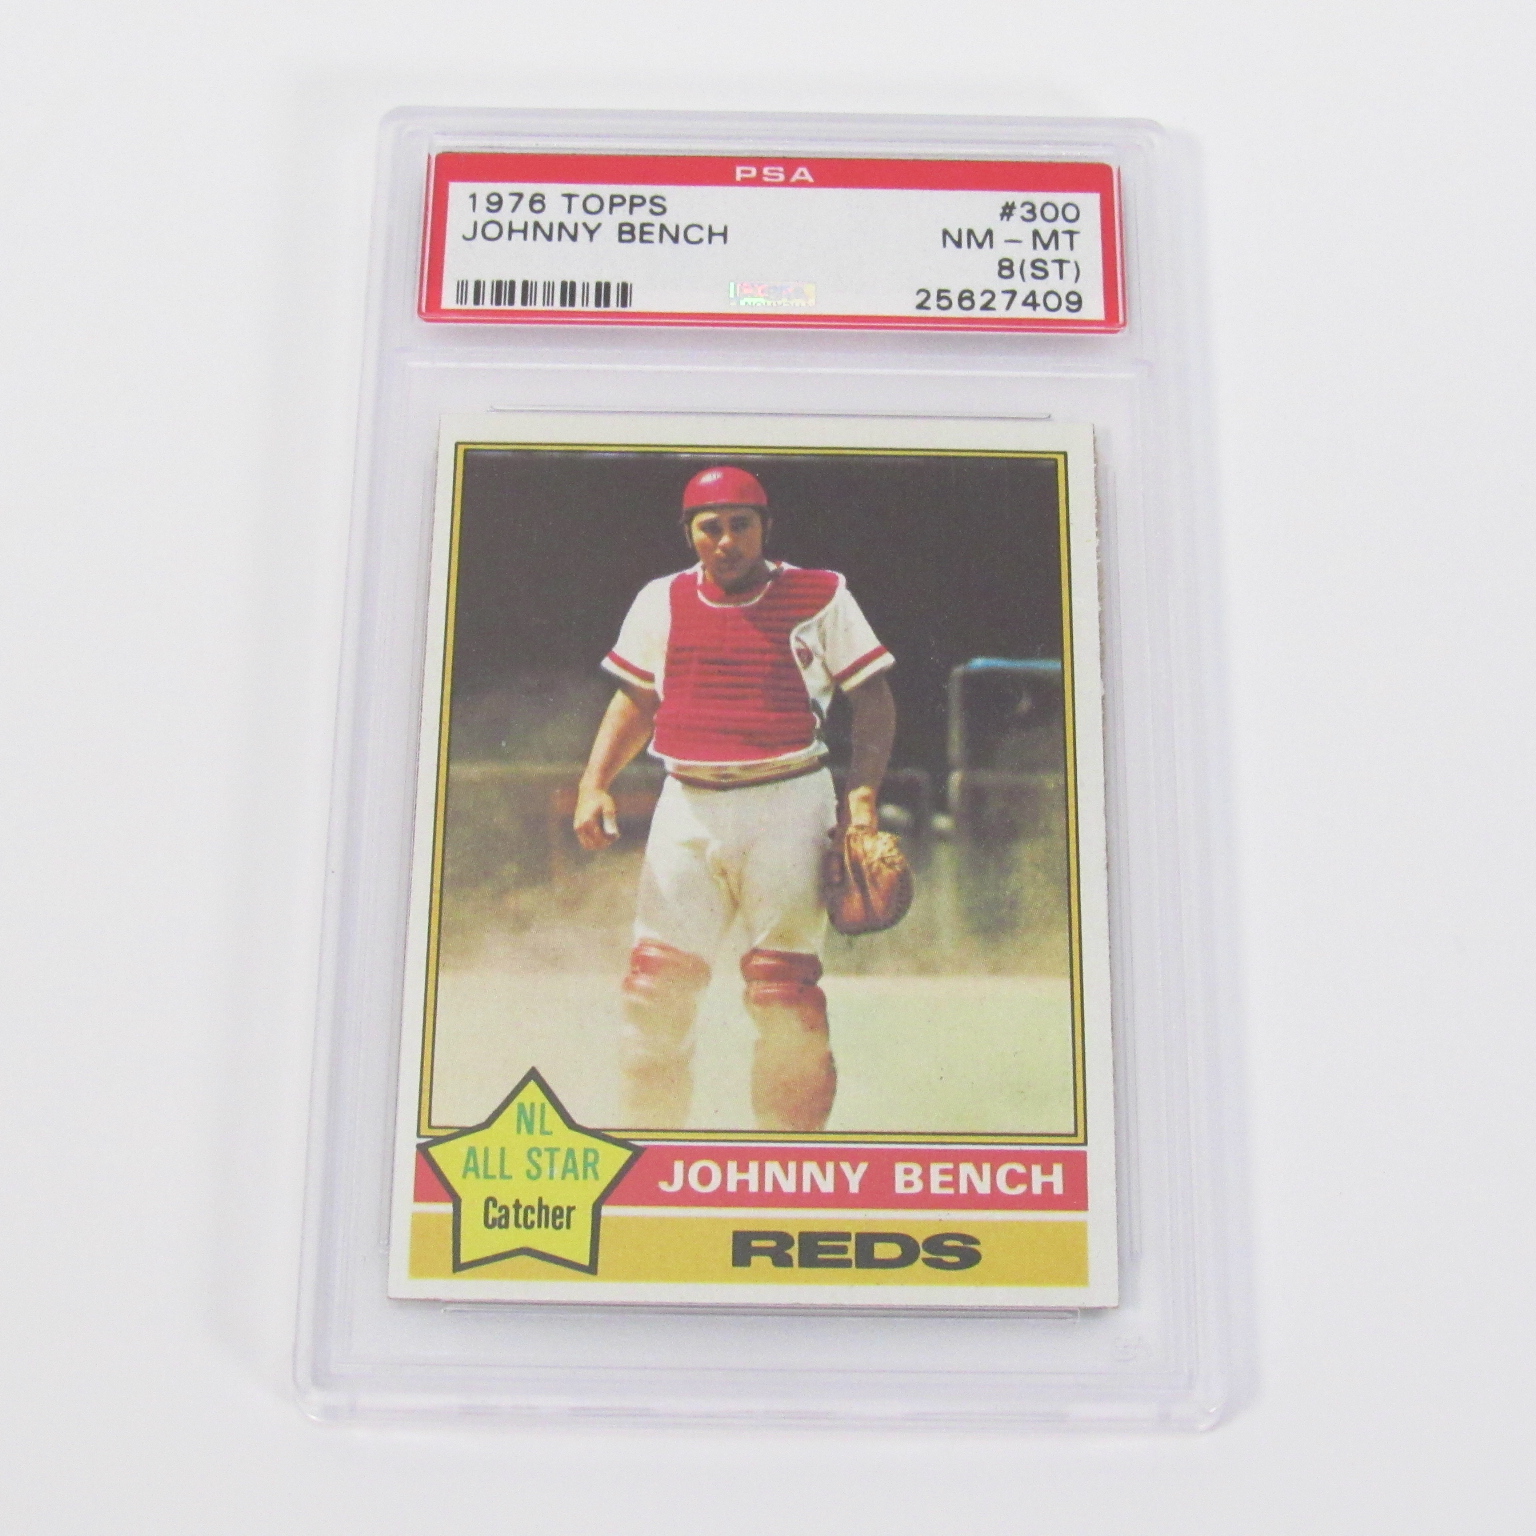 Johnny Bench 1976 TOPPS NL ALL STAR CATCHER Card #300 REDS